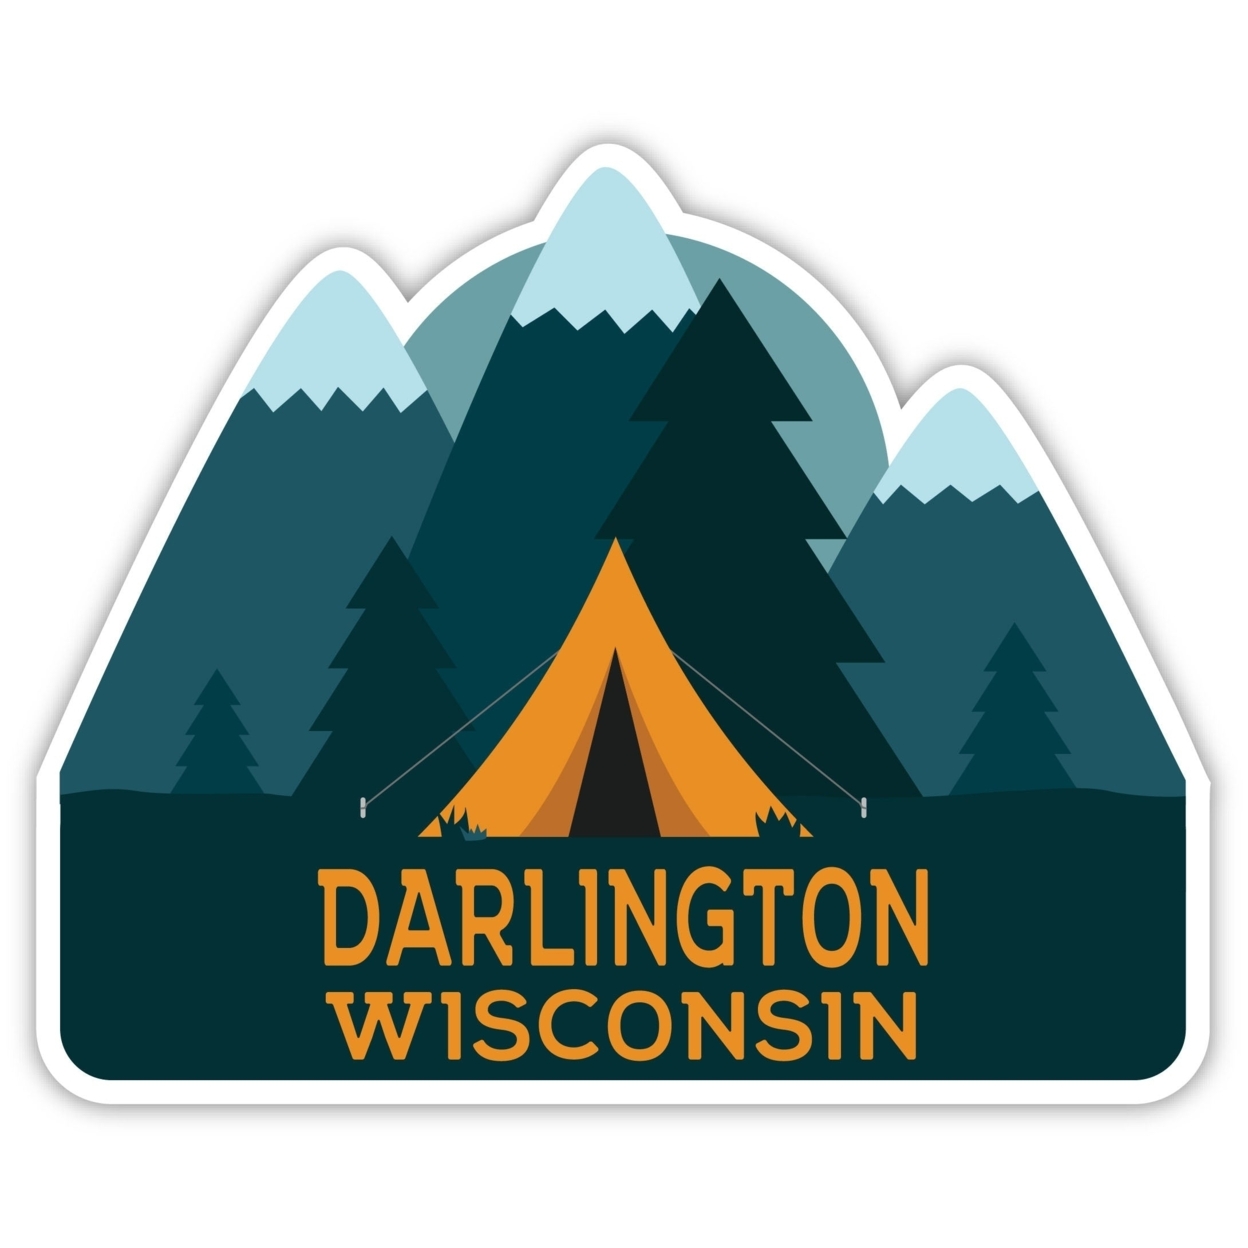 Darlington Wisconsin Souvenir Decorative Stickers (Choose Theme And Size) - 4-Pack, 2-Inch, Tent